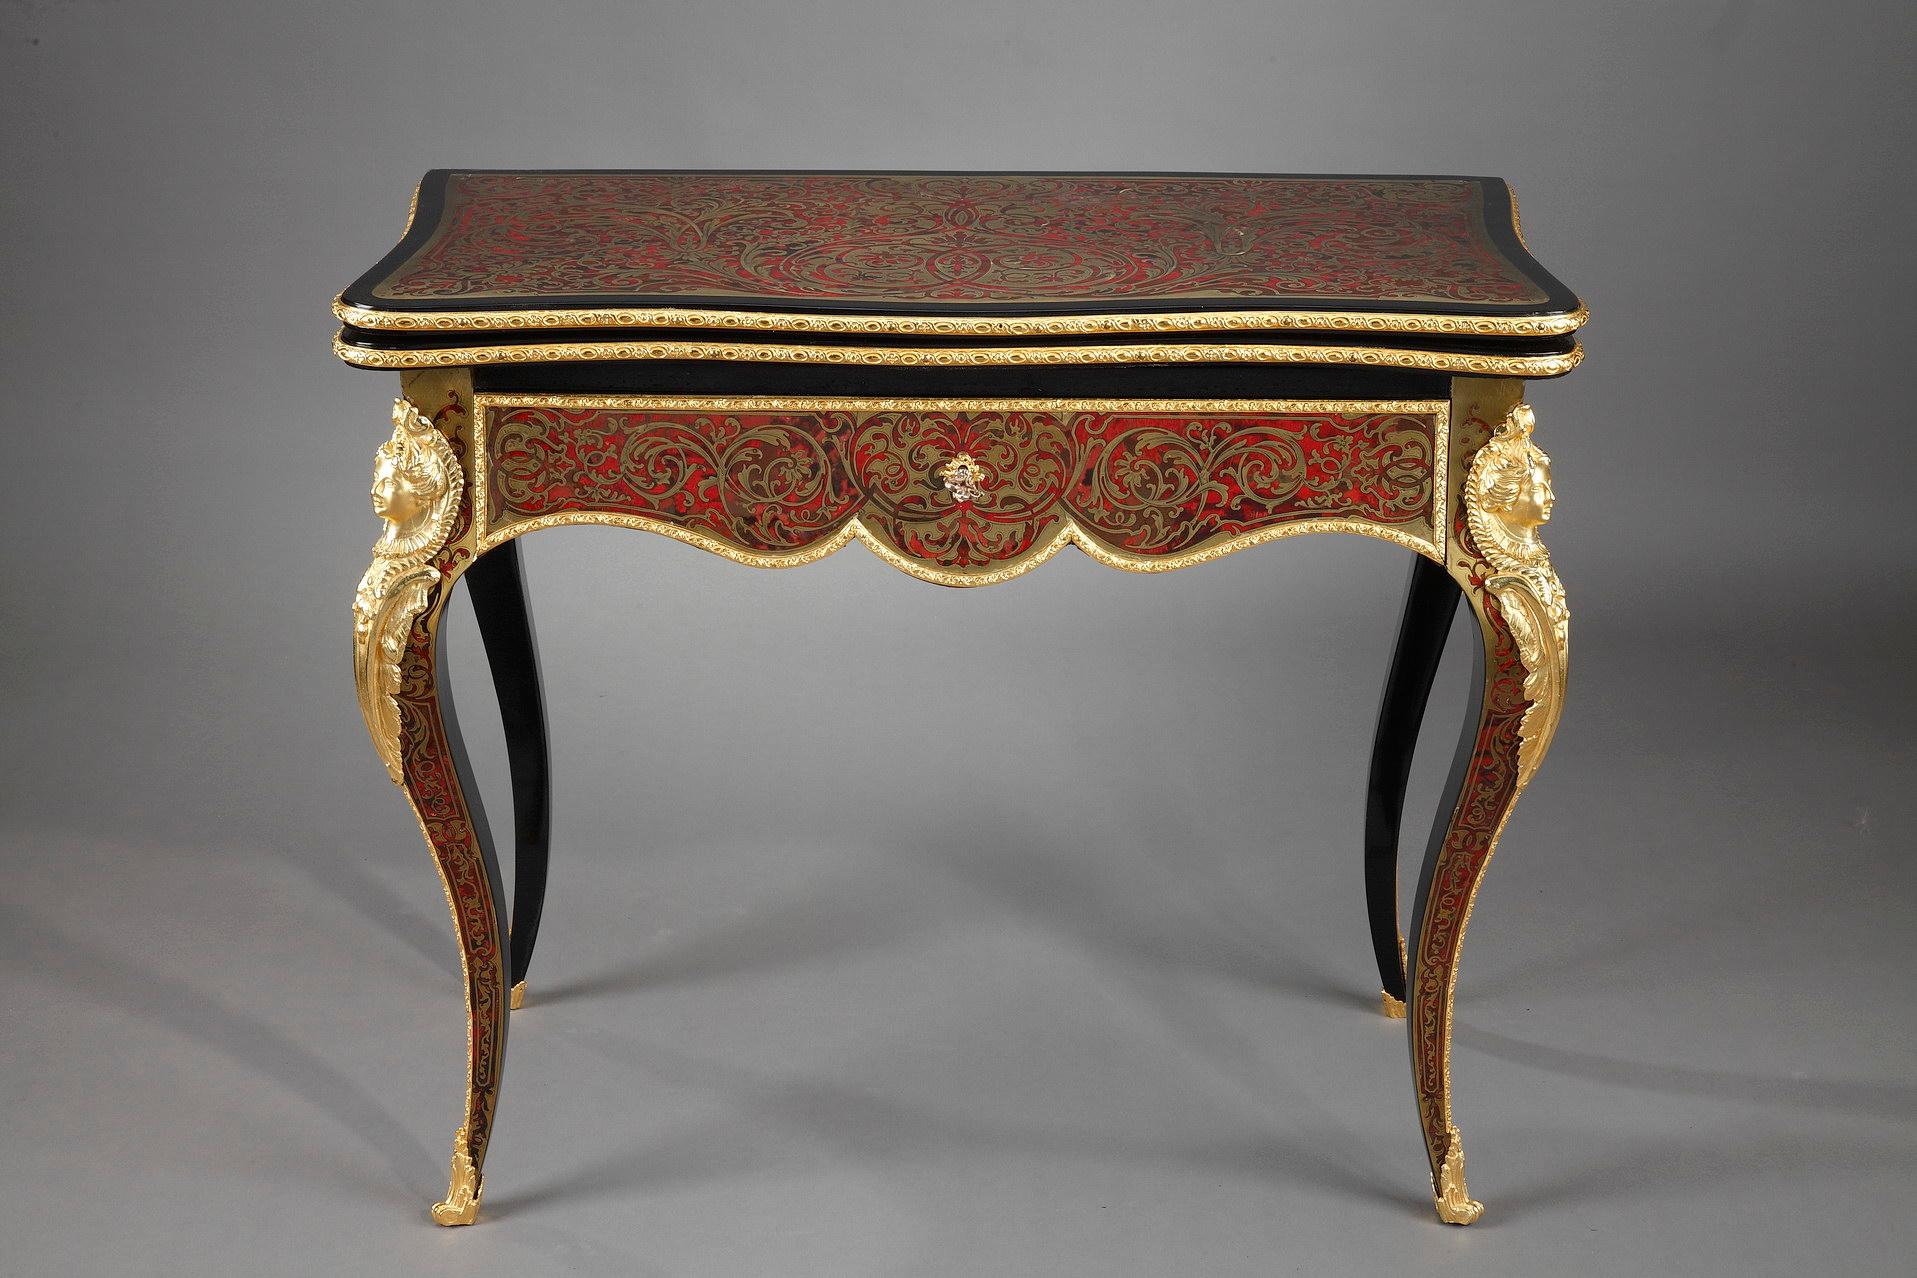 Console in Boulle marquetry with brass background with scrolls, arabesques and flowers, convertible into a game table. The console is richly decorated with gilded bronzes. The top is surrounded by a finely chiseled baguette and rests on four arched